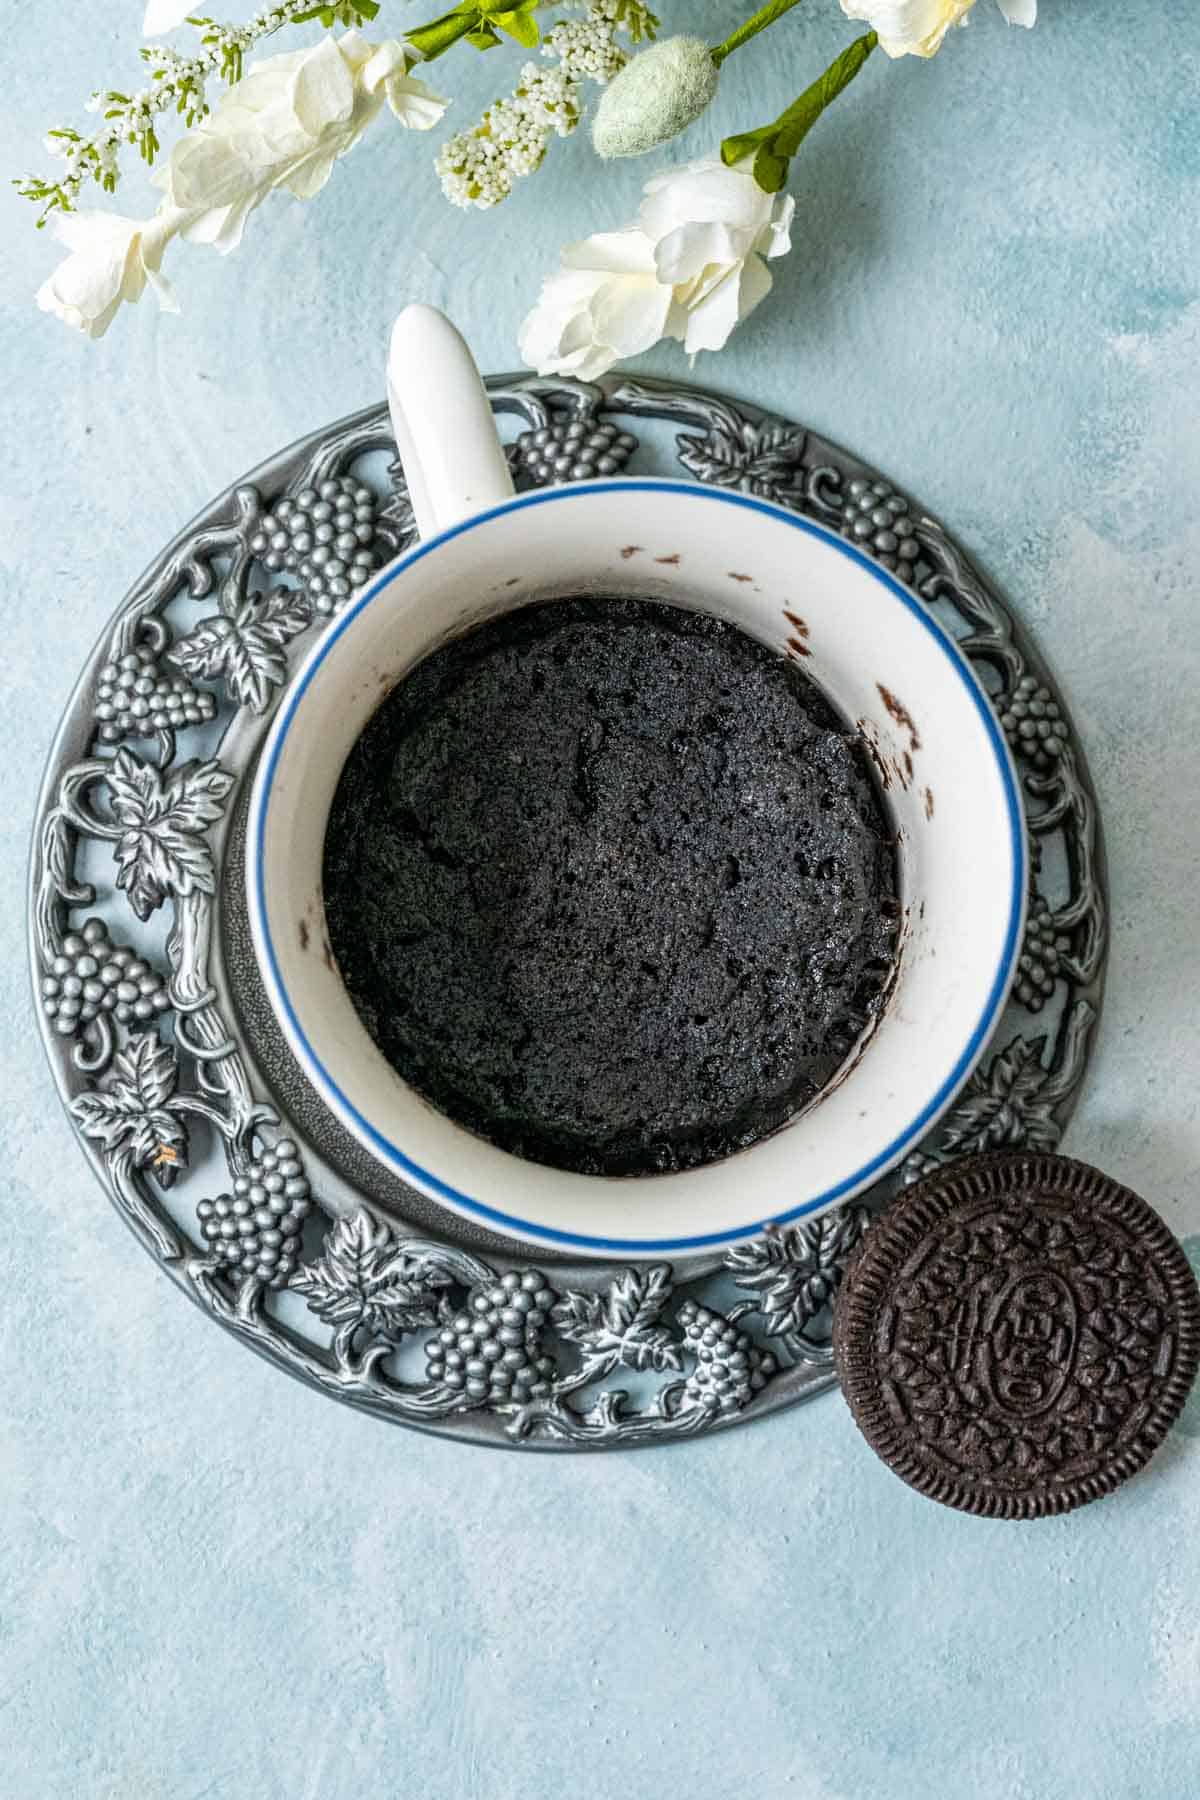 Oreo mug cake in a white cup placed on a blue table with an oreo cookie on the plate.